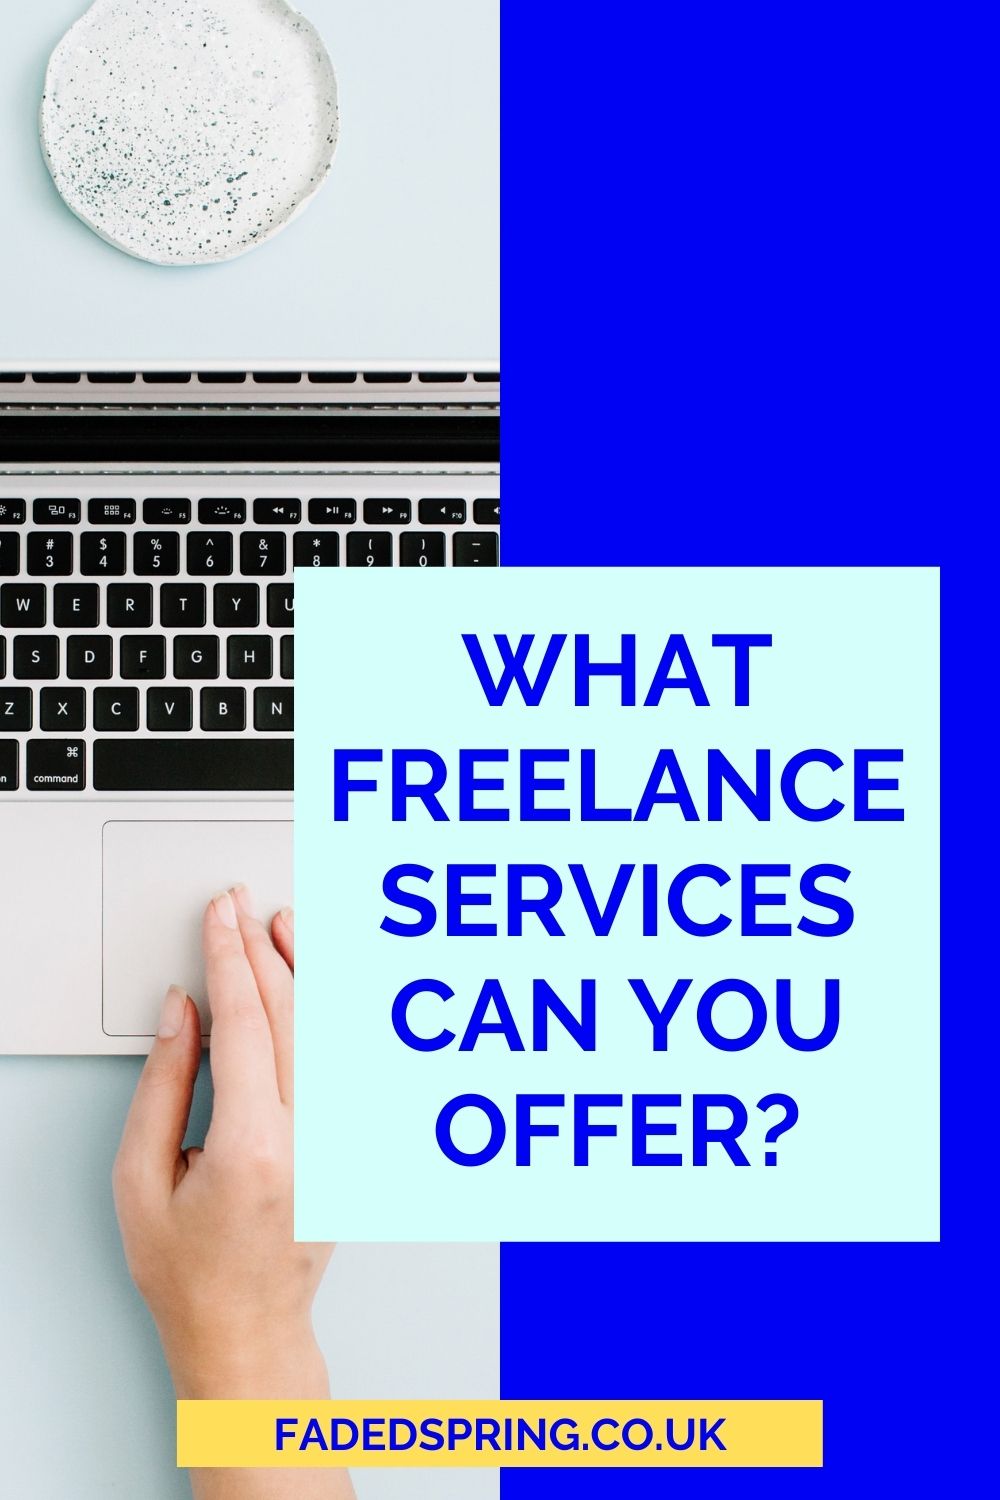 <img src="freelance.jpg" alt="freelance services and packages"/> 